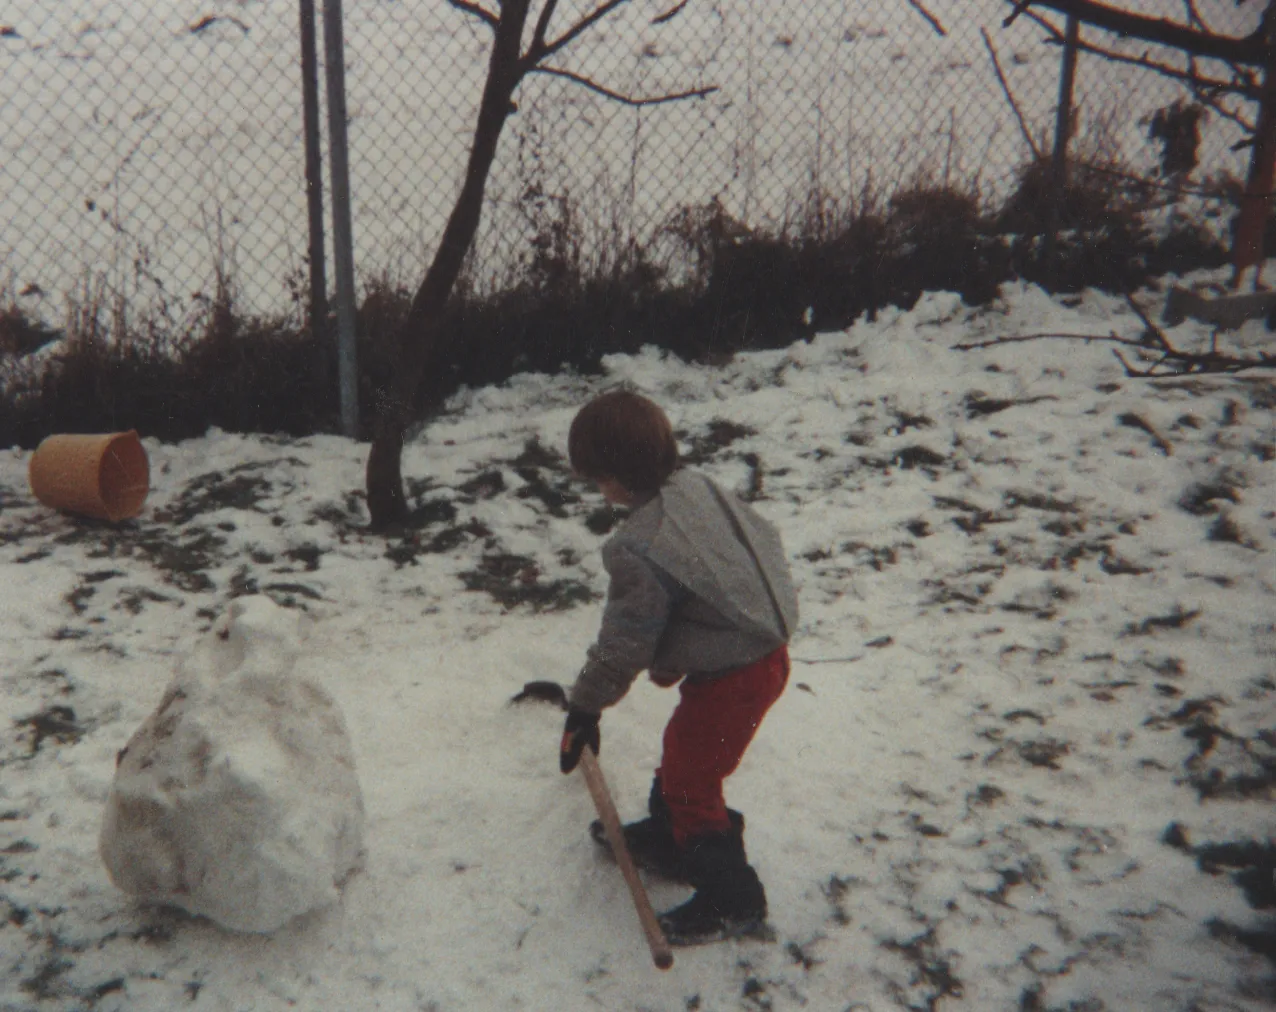 1991-02 - Joey building a snowman or something, might be early in 1991 or before like 1997, but no idea really which month or year-2.png